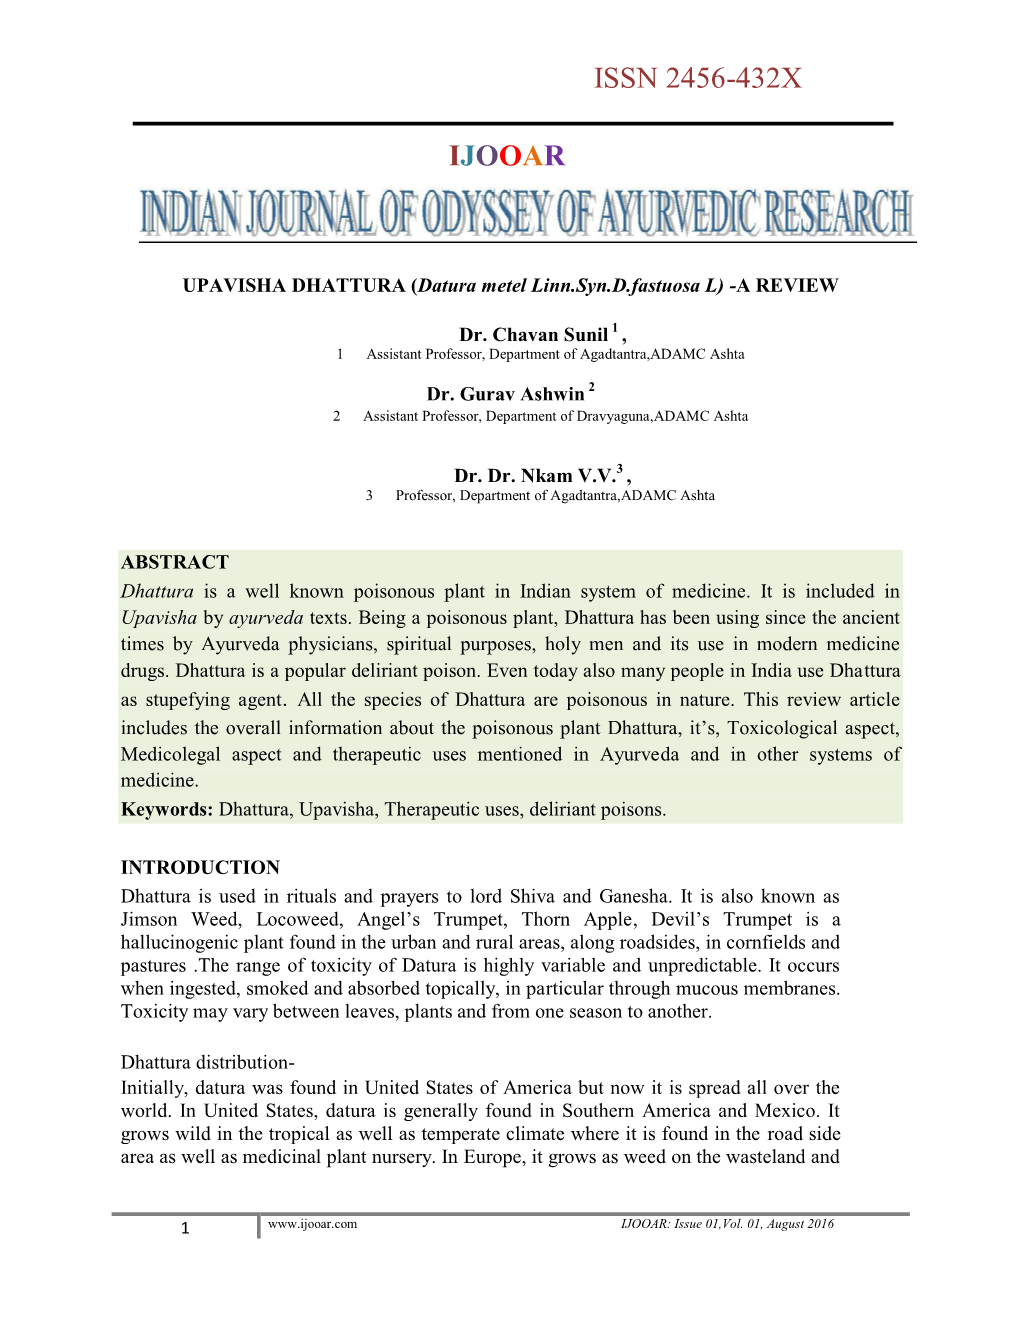 Indian Journal of Odyssey of Ayurvedic Research